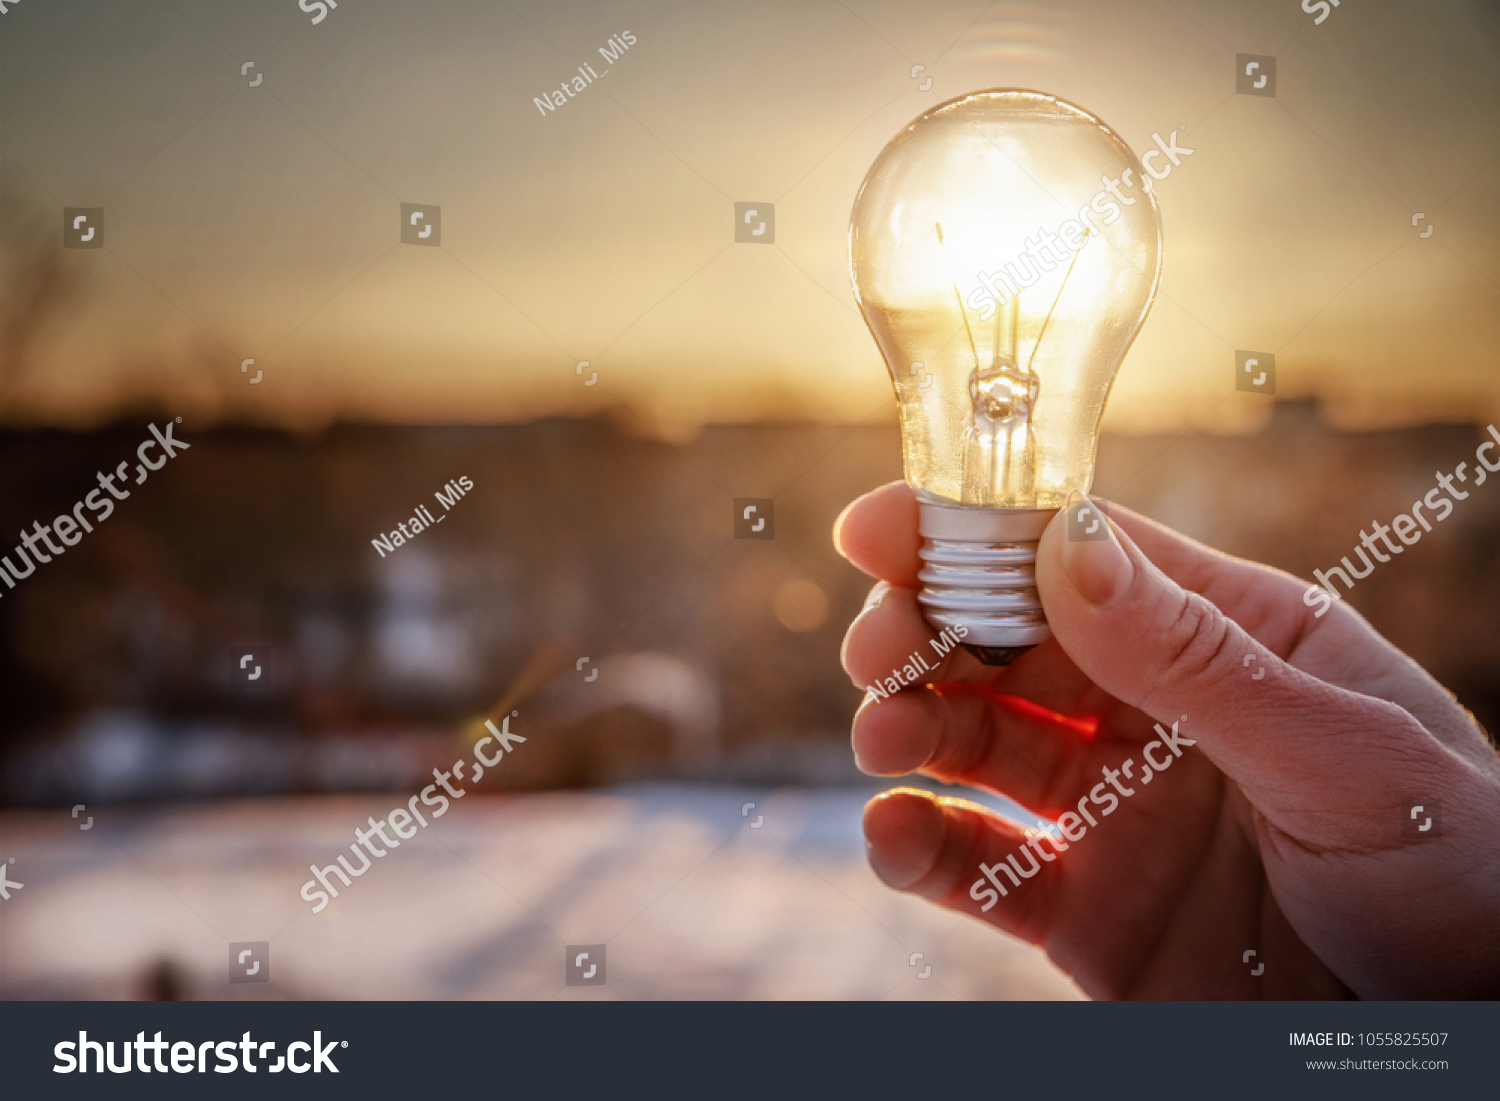 Light bulb in hand on the rising sun background. #1055825507